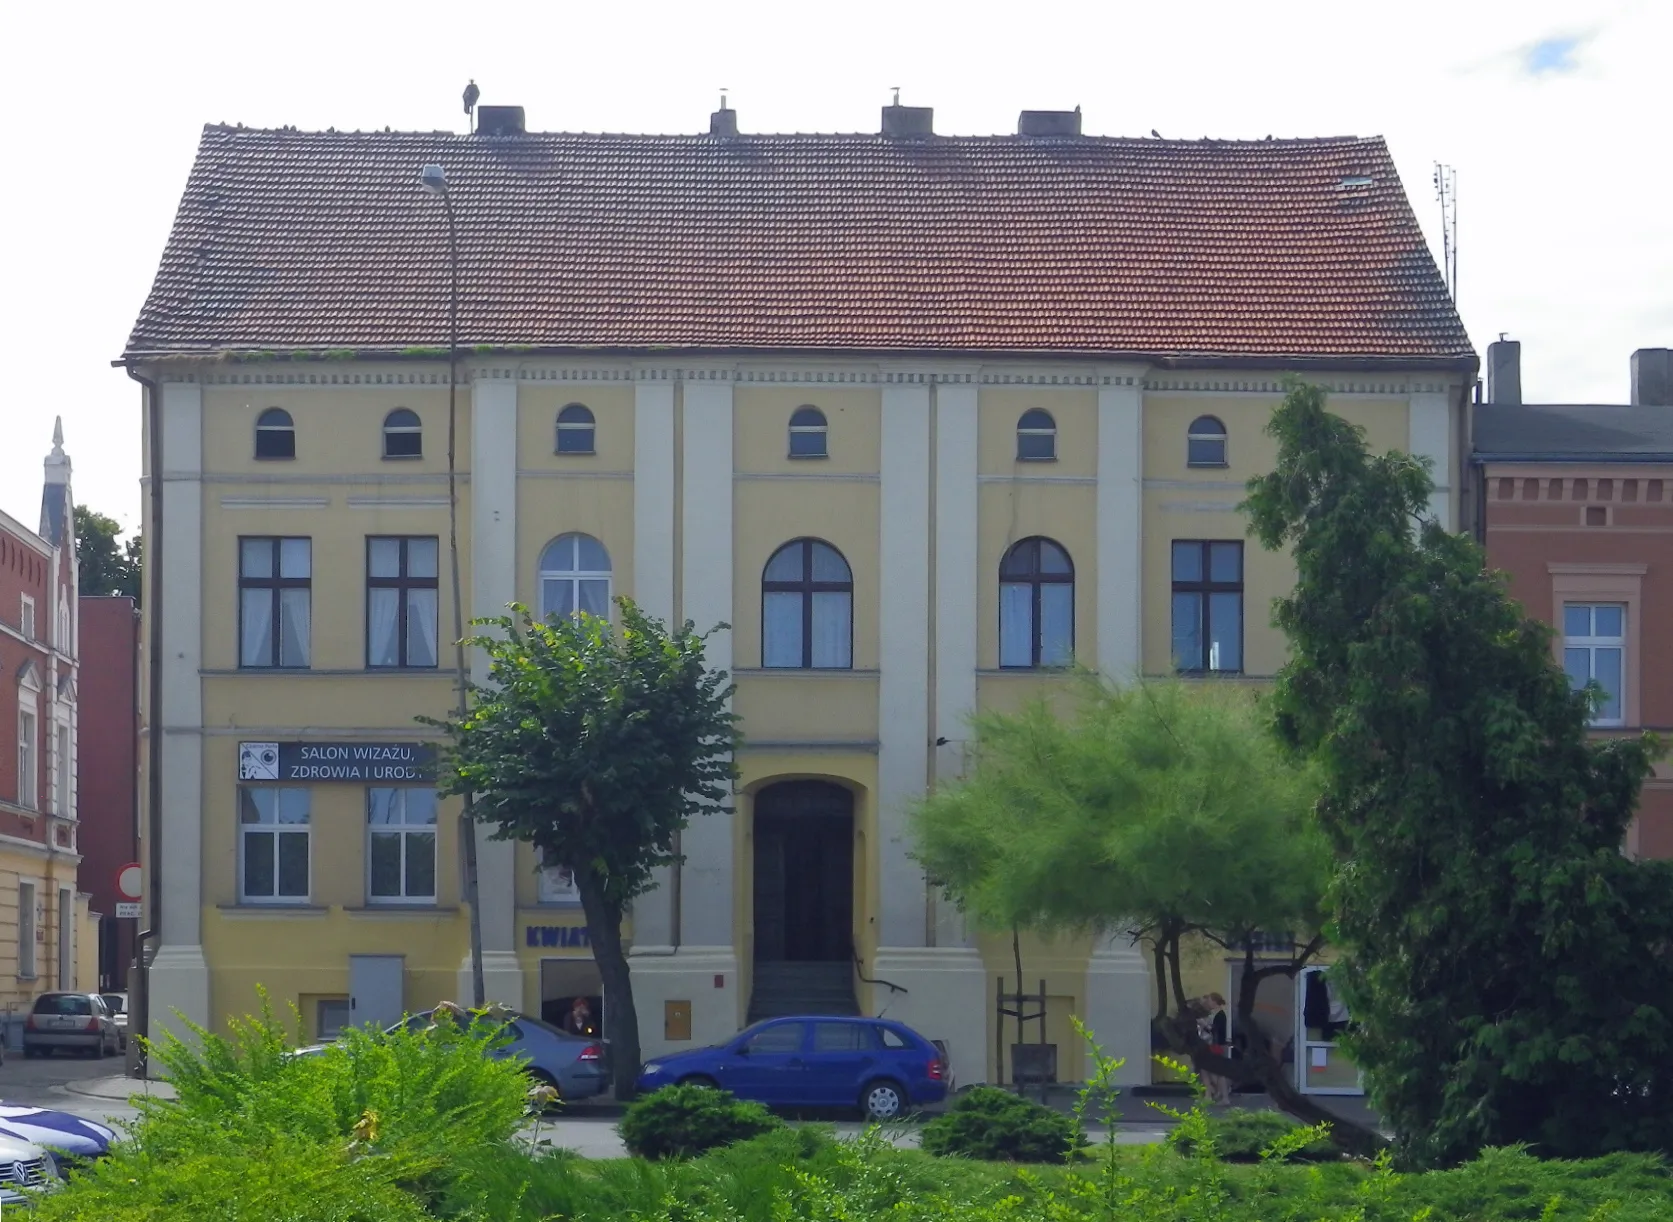 Photo showing: Former Poznań bishops' palace in Buk (Poland), nowadays residence building